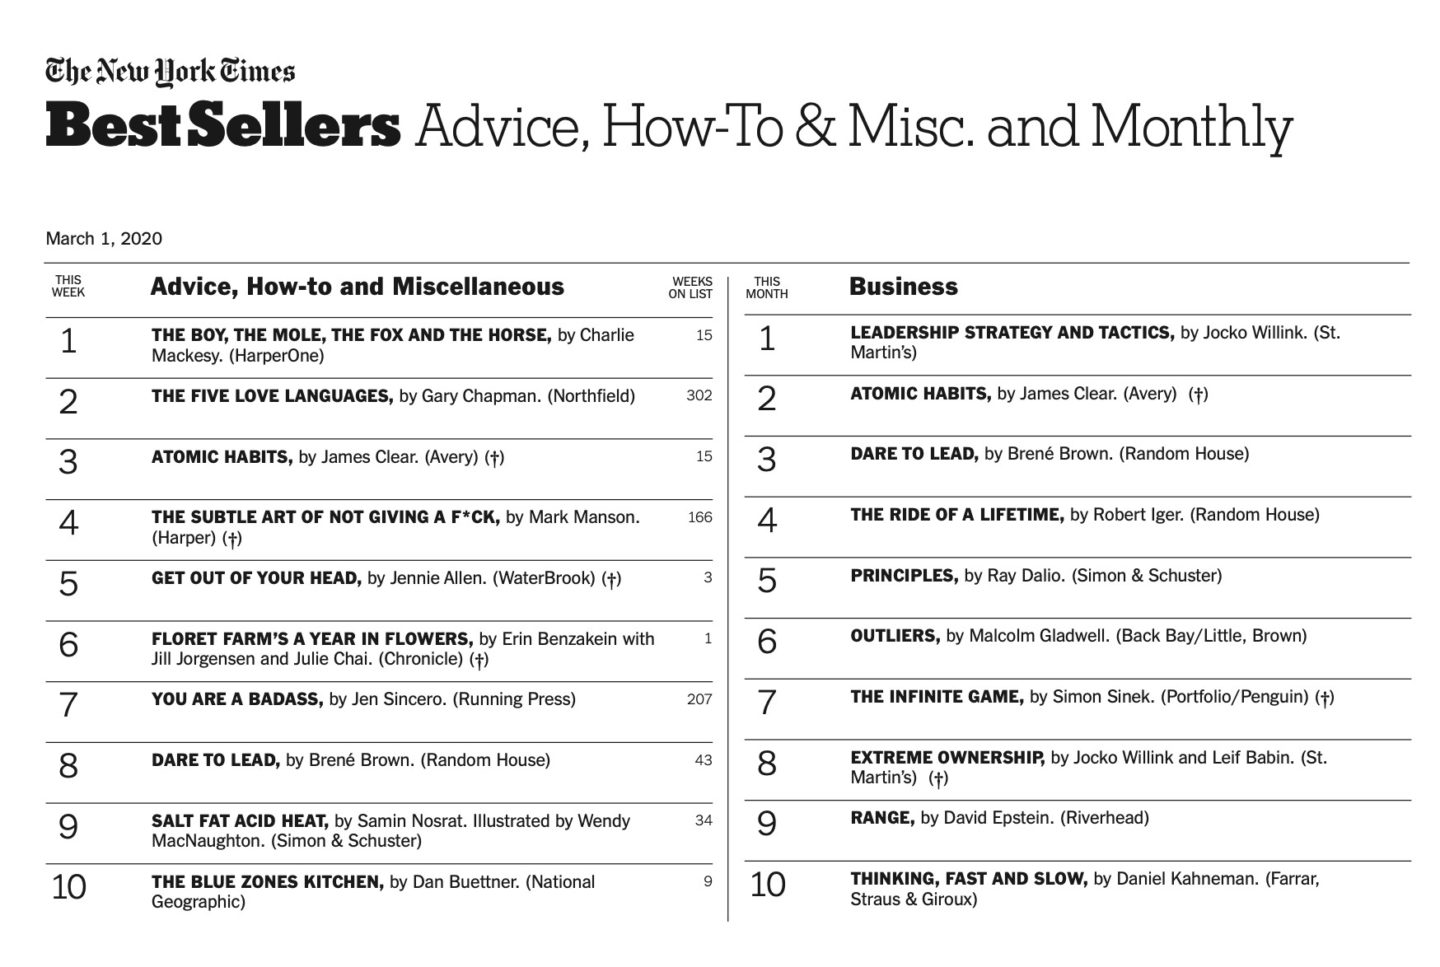 A Year in Flowers Makes The New York Times Best Seller List